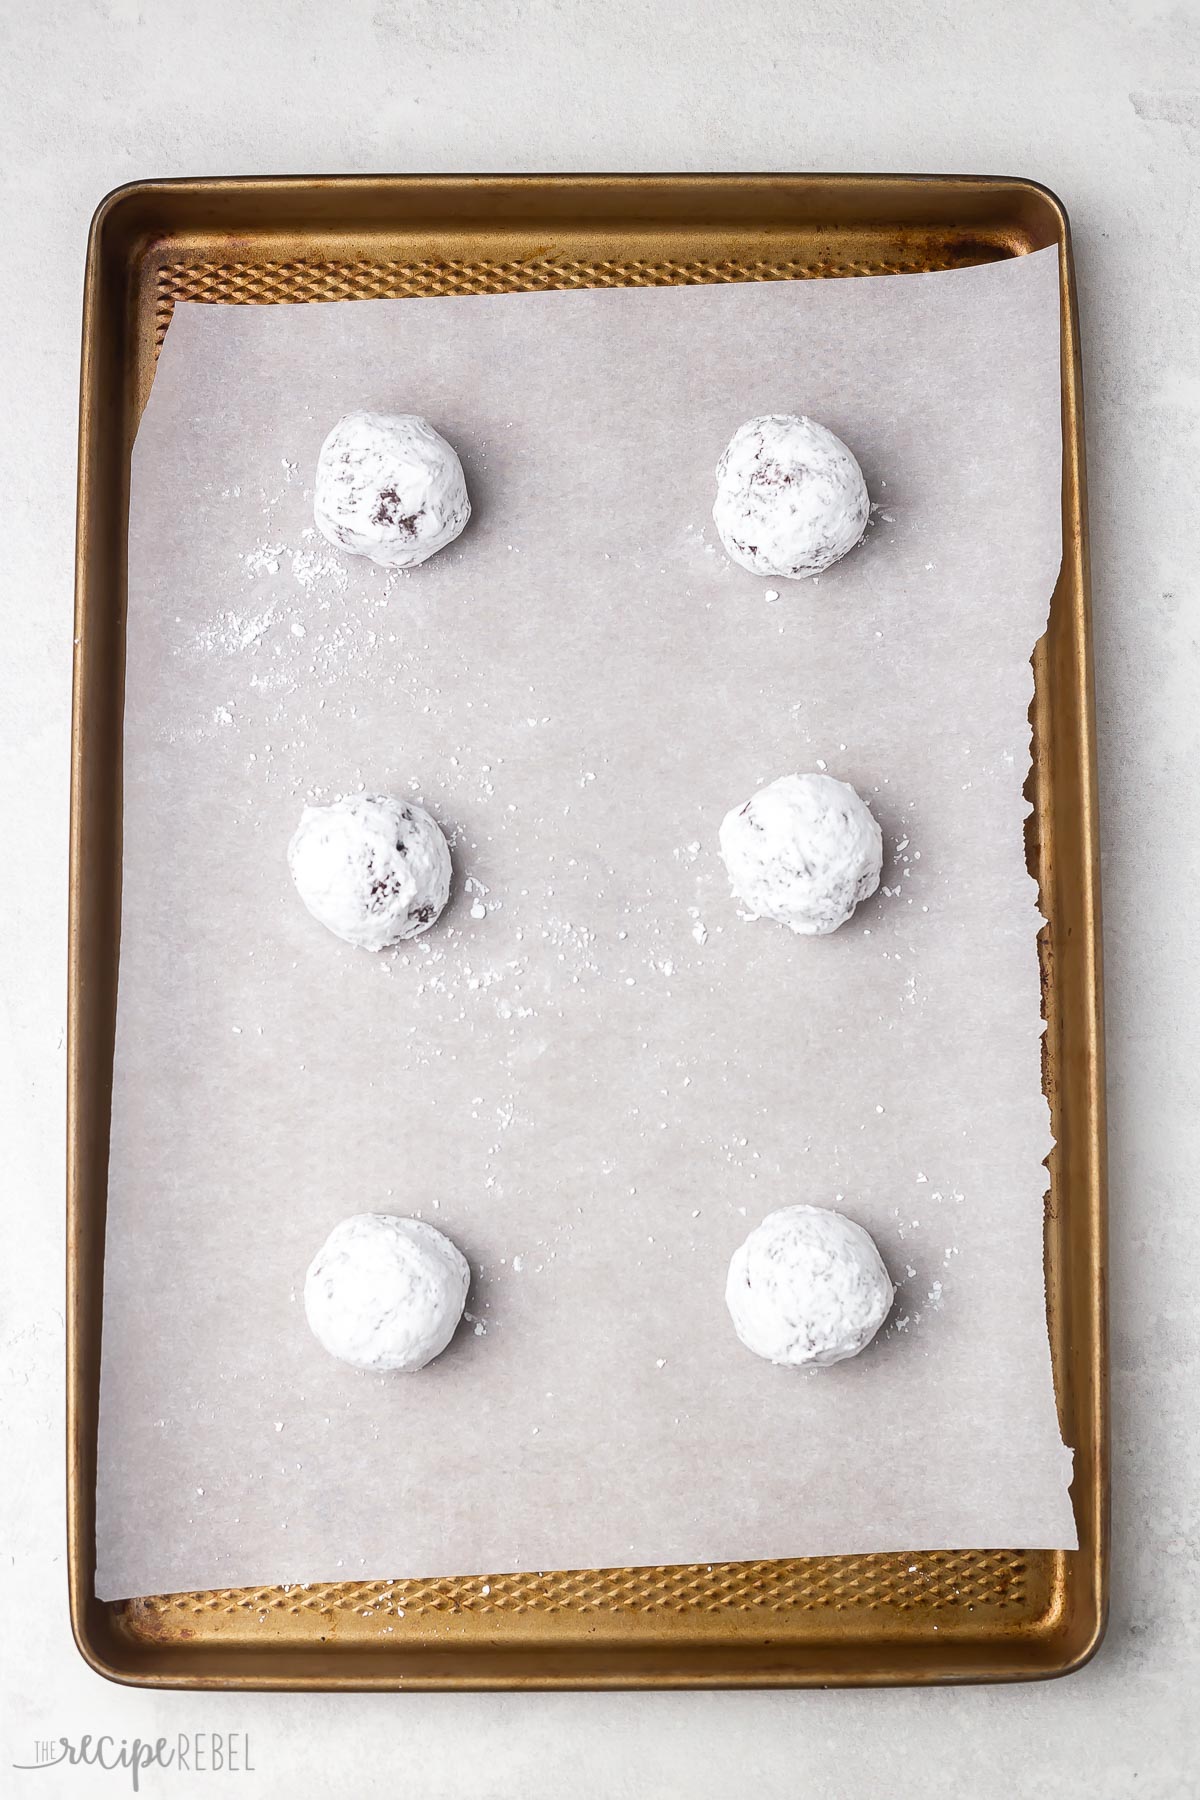 powdered sugar coated cookies on parchment lined baking sheet.